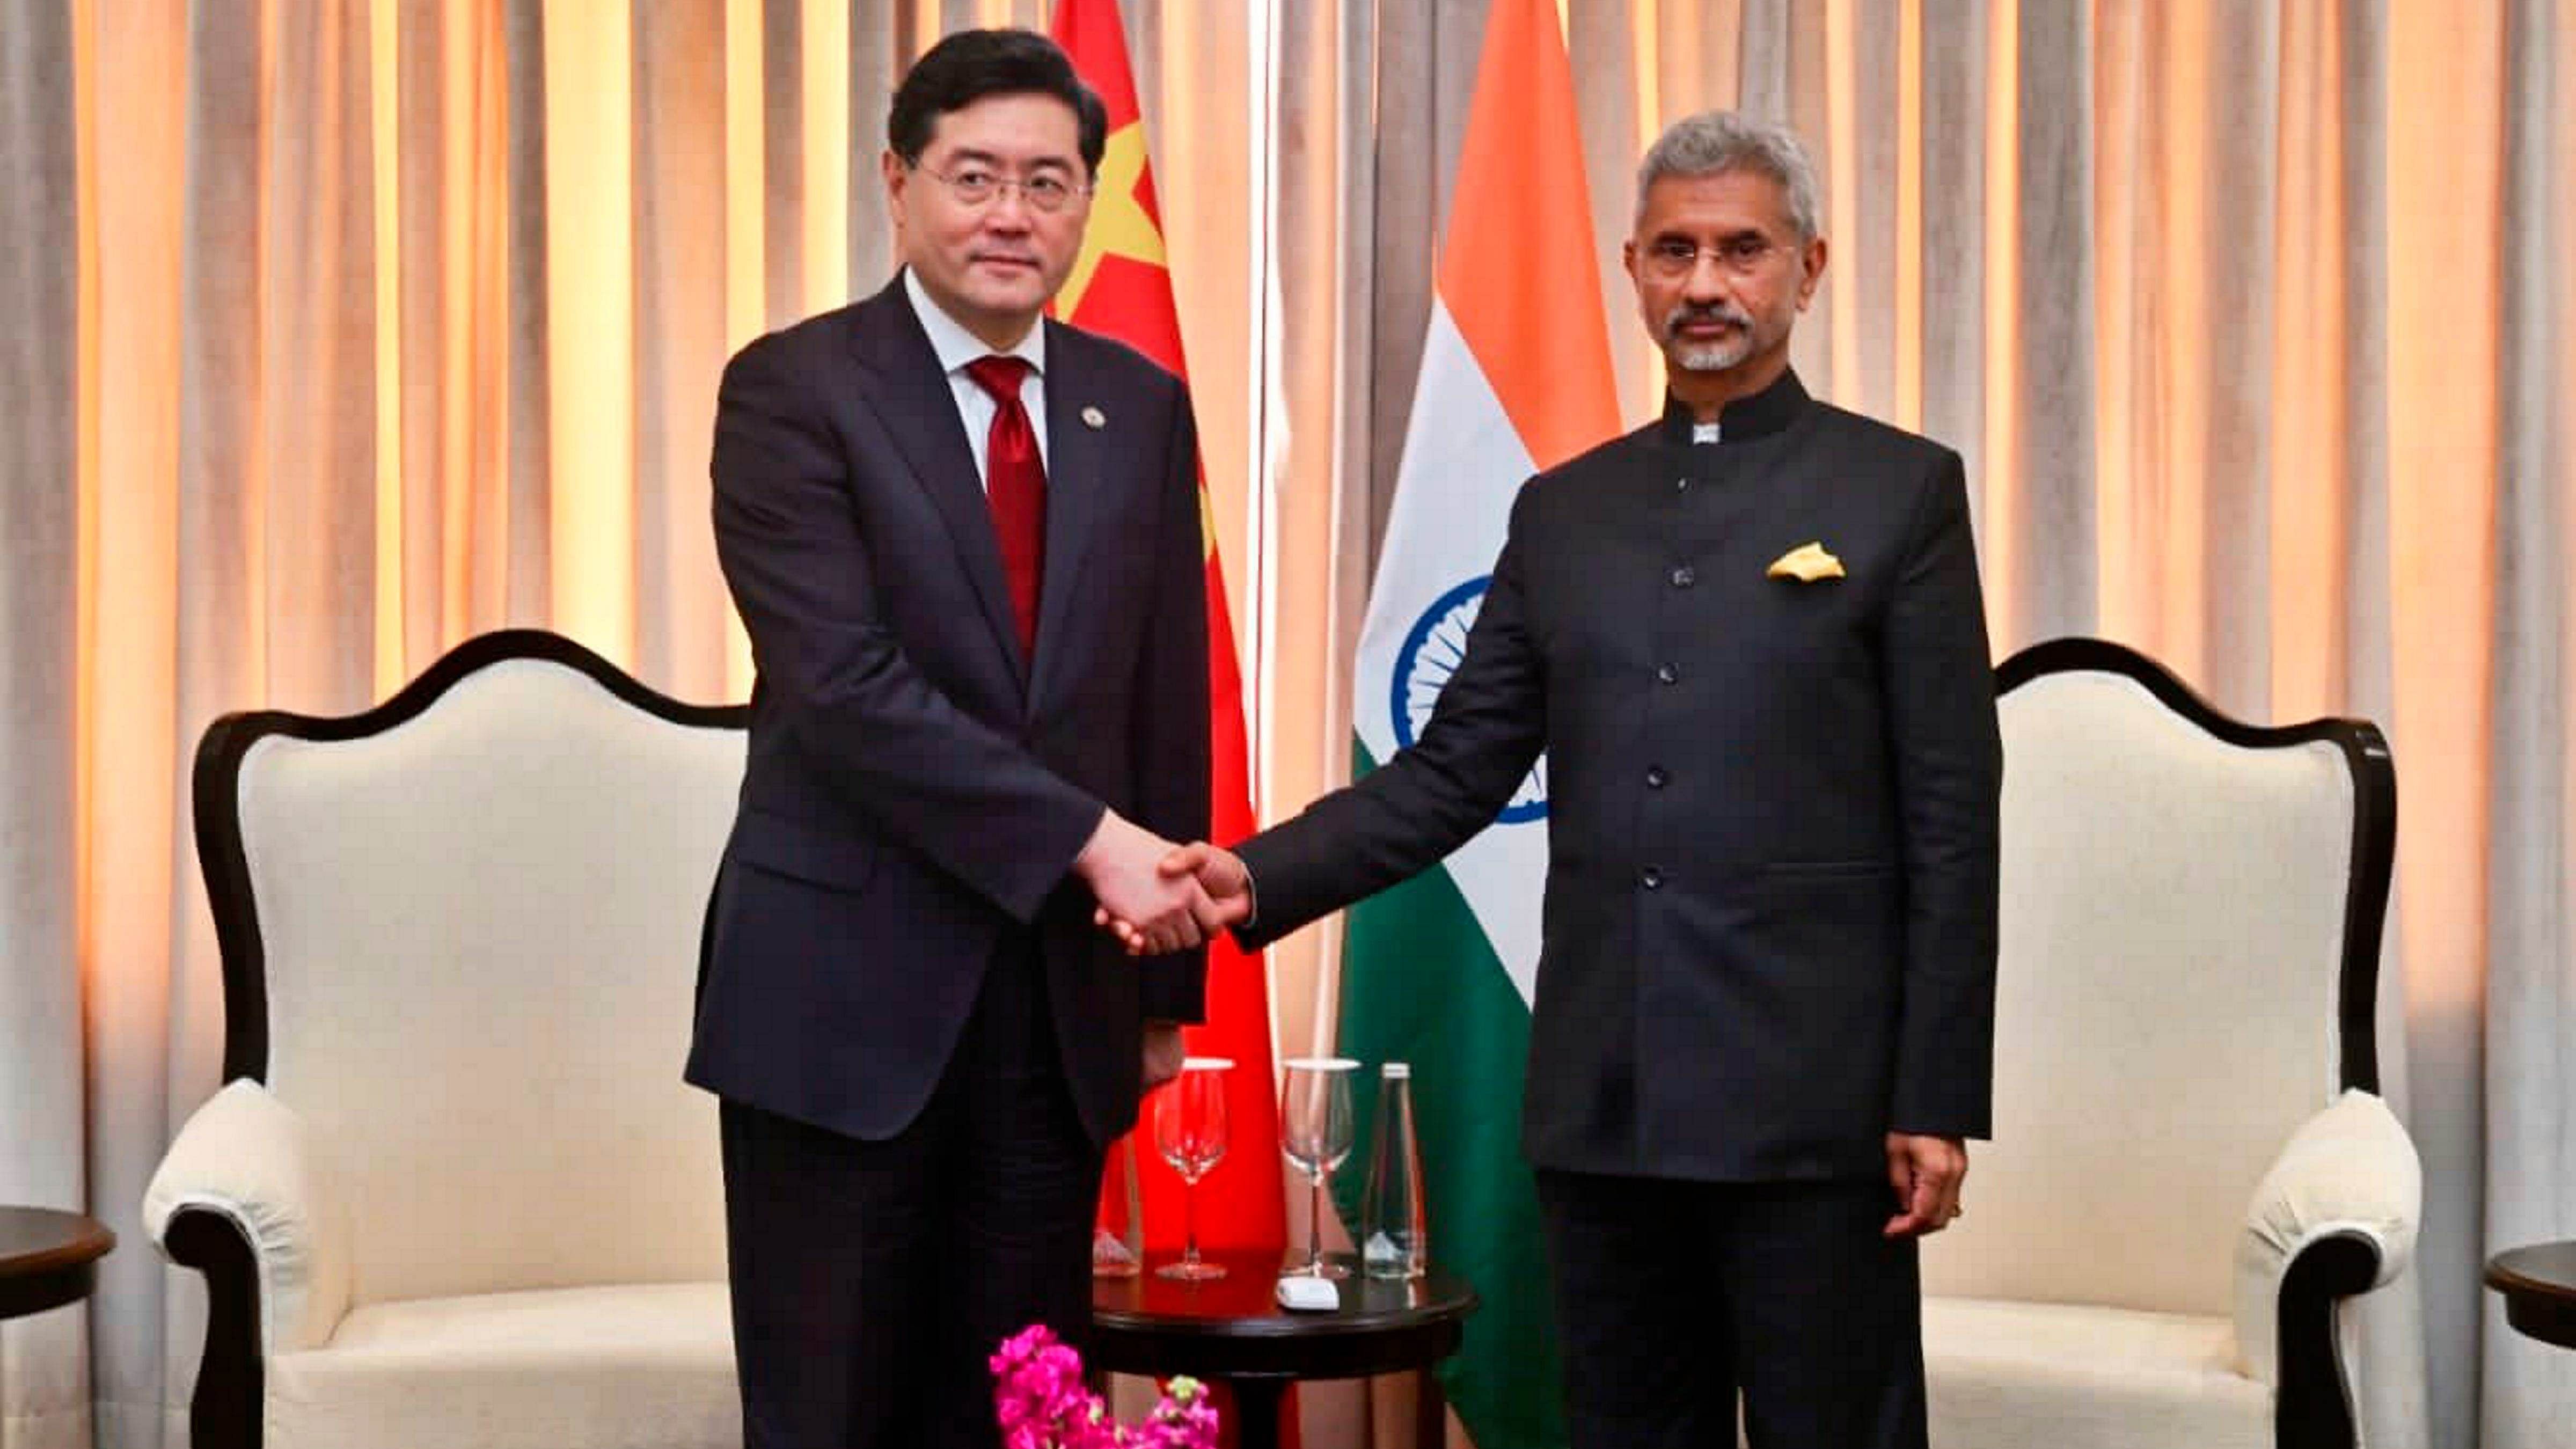 External Affairs Minister S Jaishankar with Chinese Foreign Minister Qin Gang on the sidelines of G20 Foreign Ministers' Meeting, in New Delhi, Thursday, March 2, 2023. Credit: PTI Photo